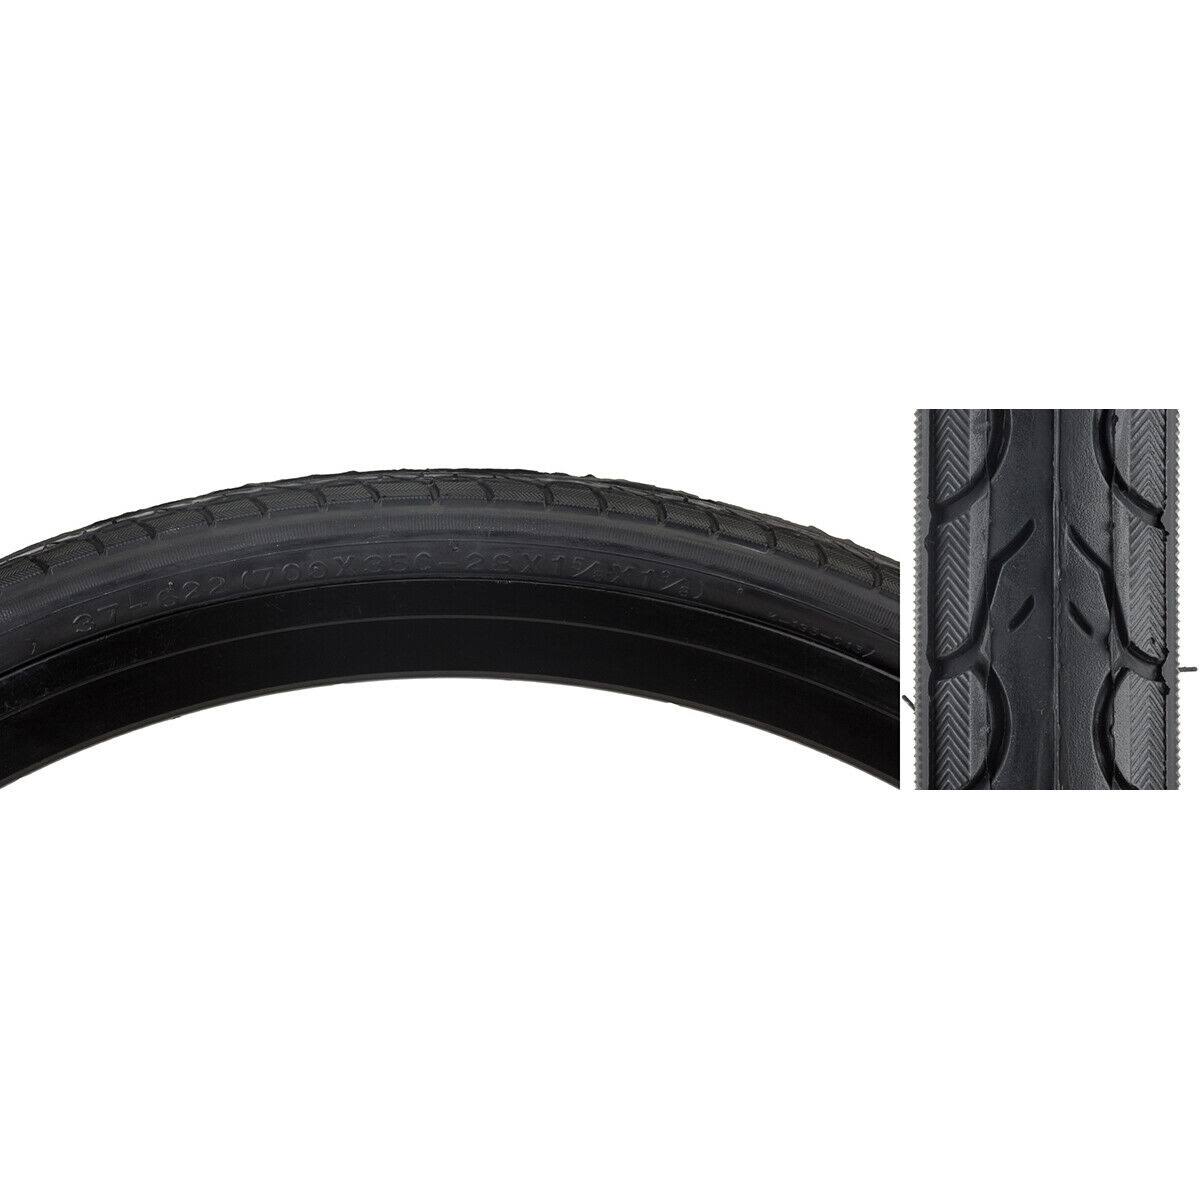 Sunlite Hybrid and Touring Kwest Tires - Black, 700c x 35mm